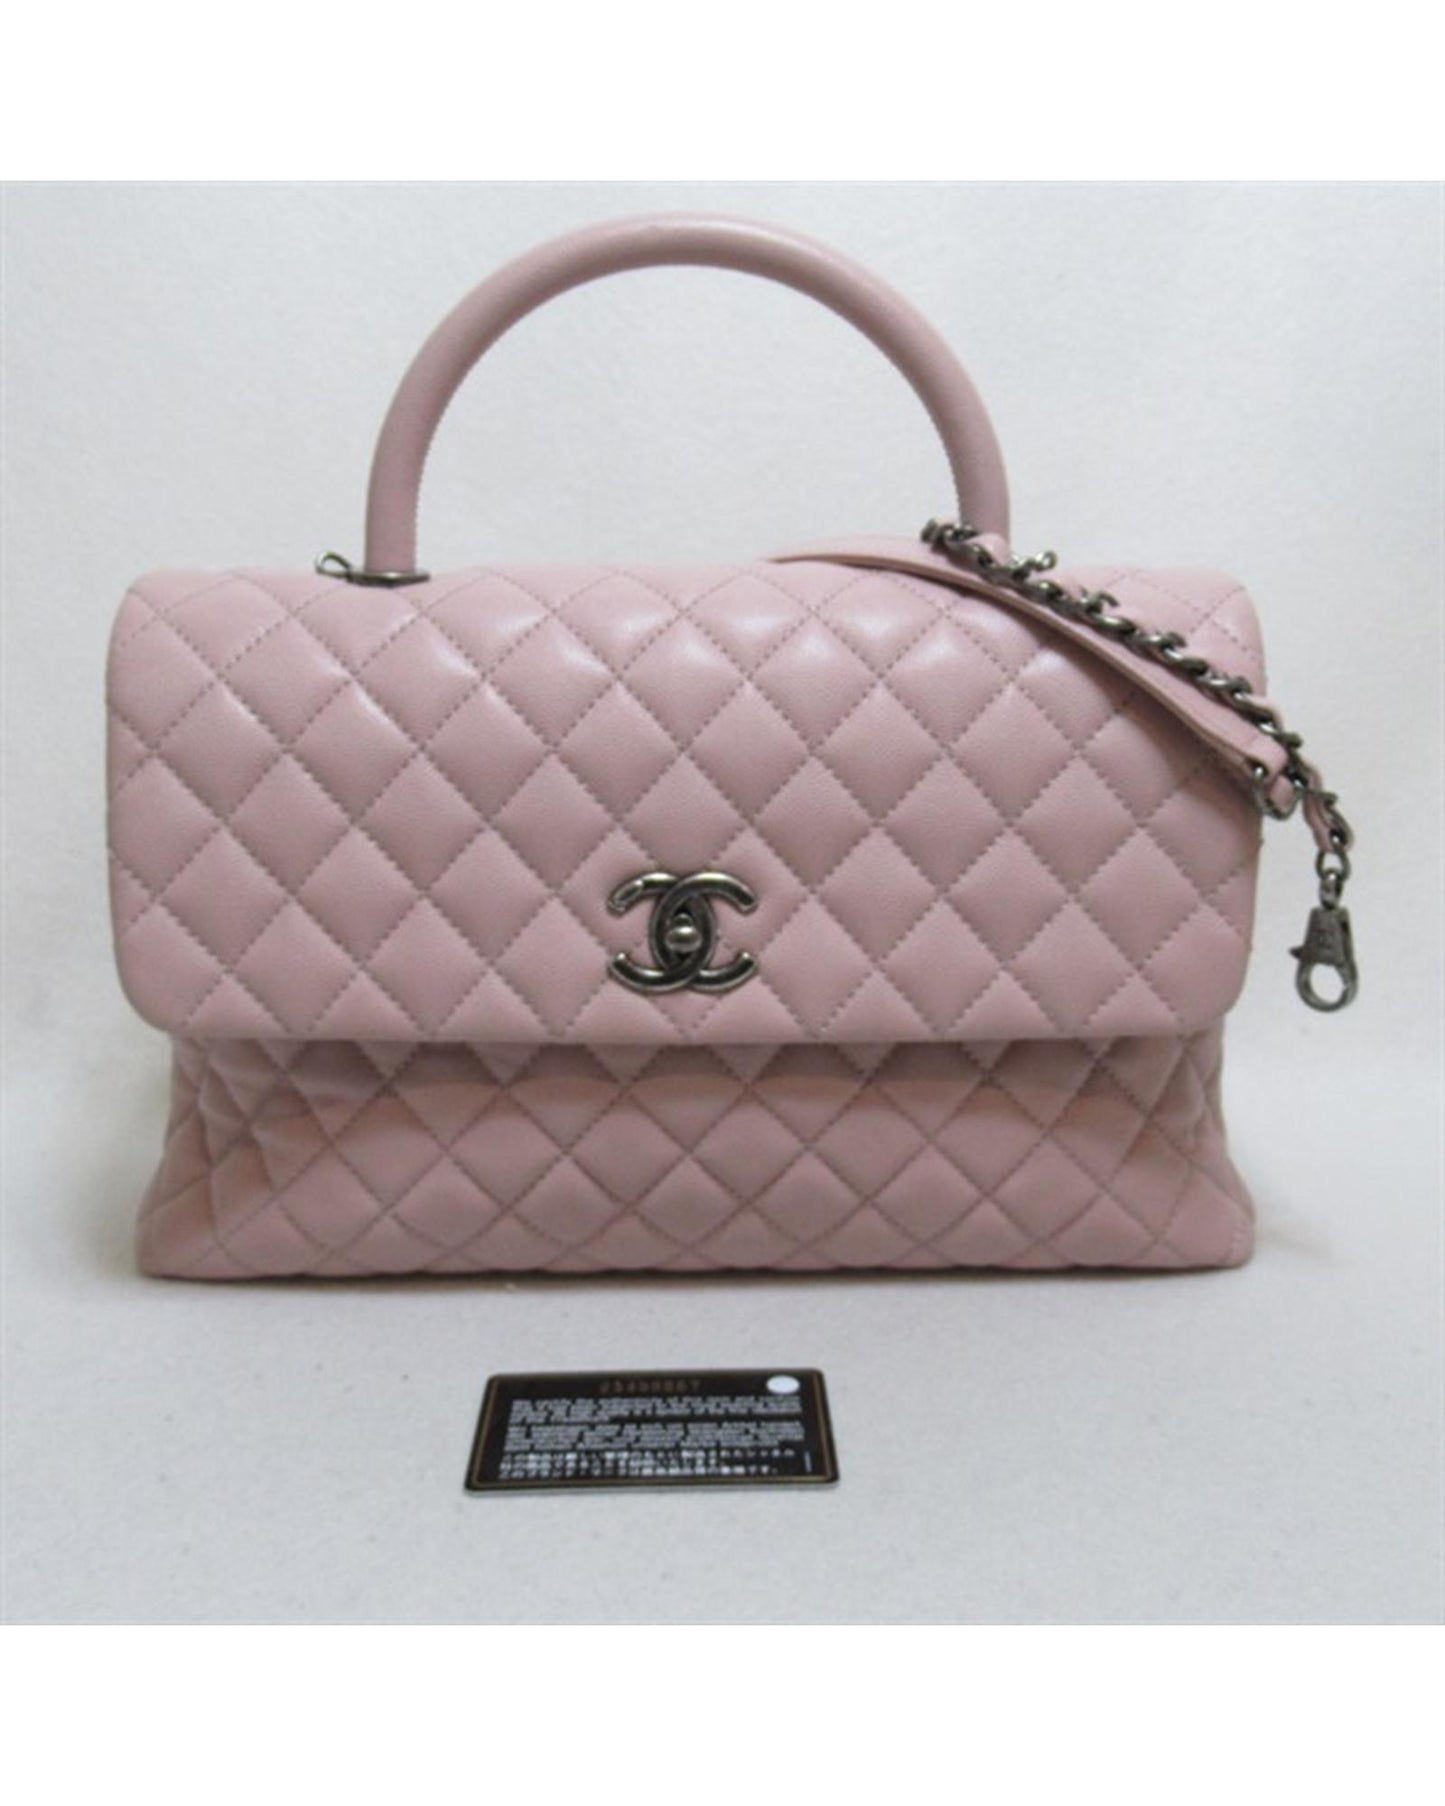 Chanel Women's Caviar Medium Coco Handle Bag in Pink by Chanel in Pink